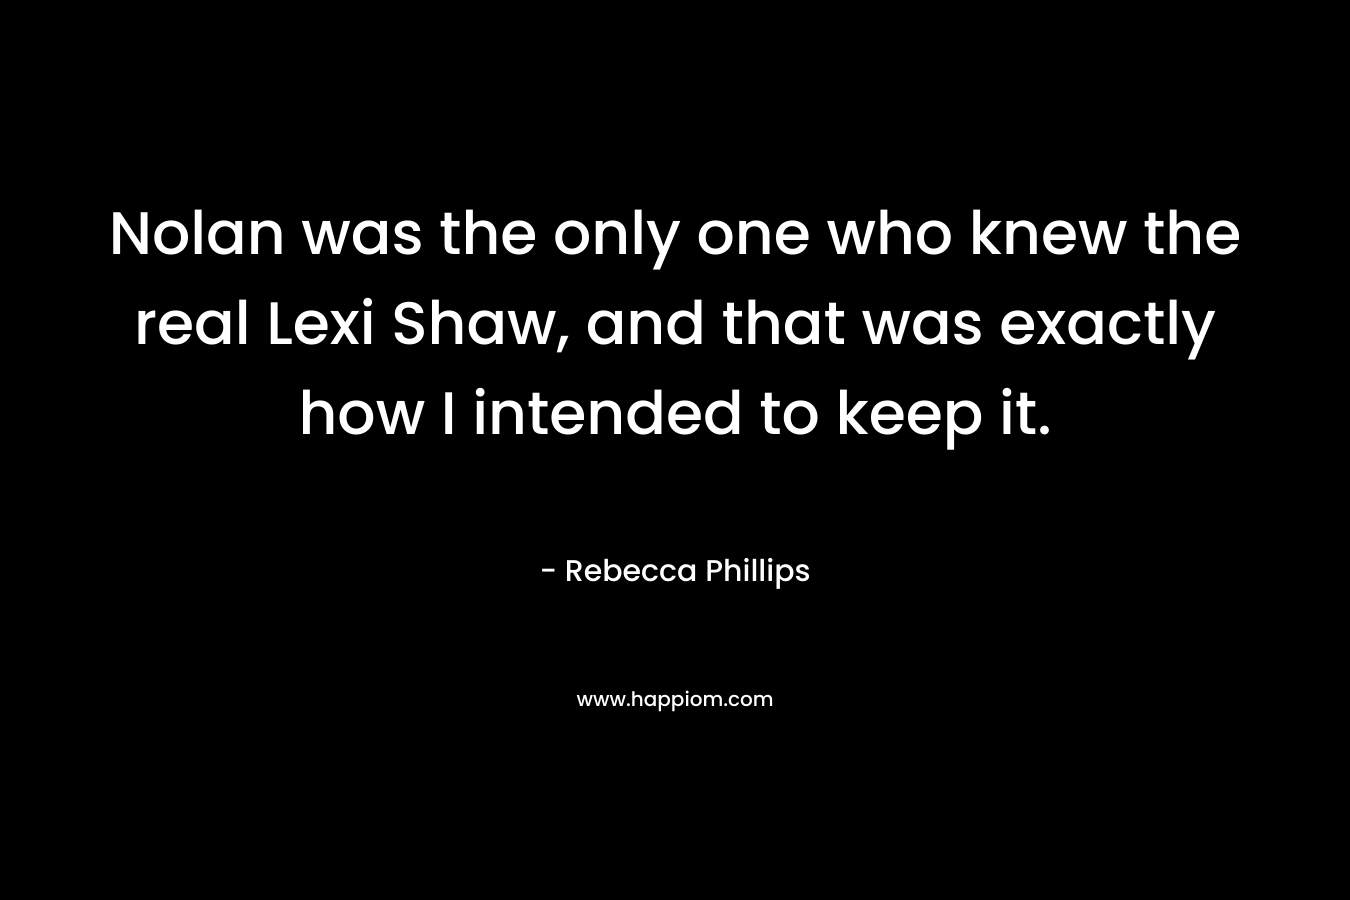 Nolan was the only one who knew the real Lexi Shaw, and that was exactly how I intended to keep it. – Rebecca Phillips